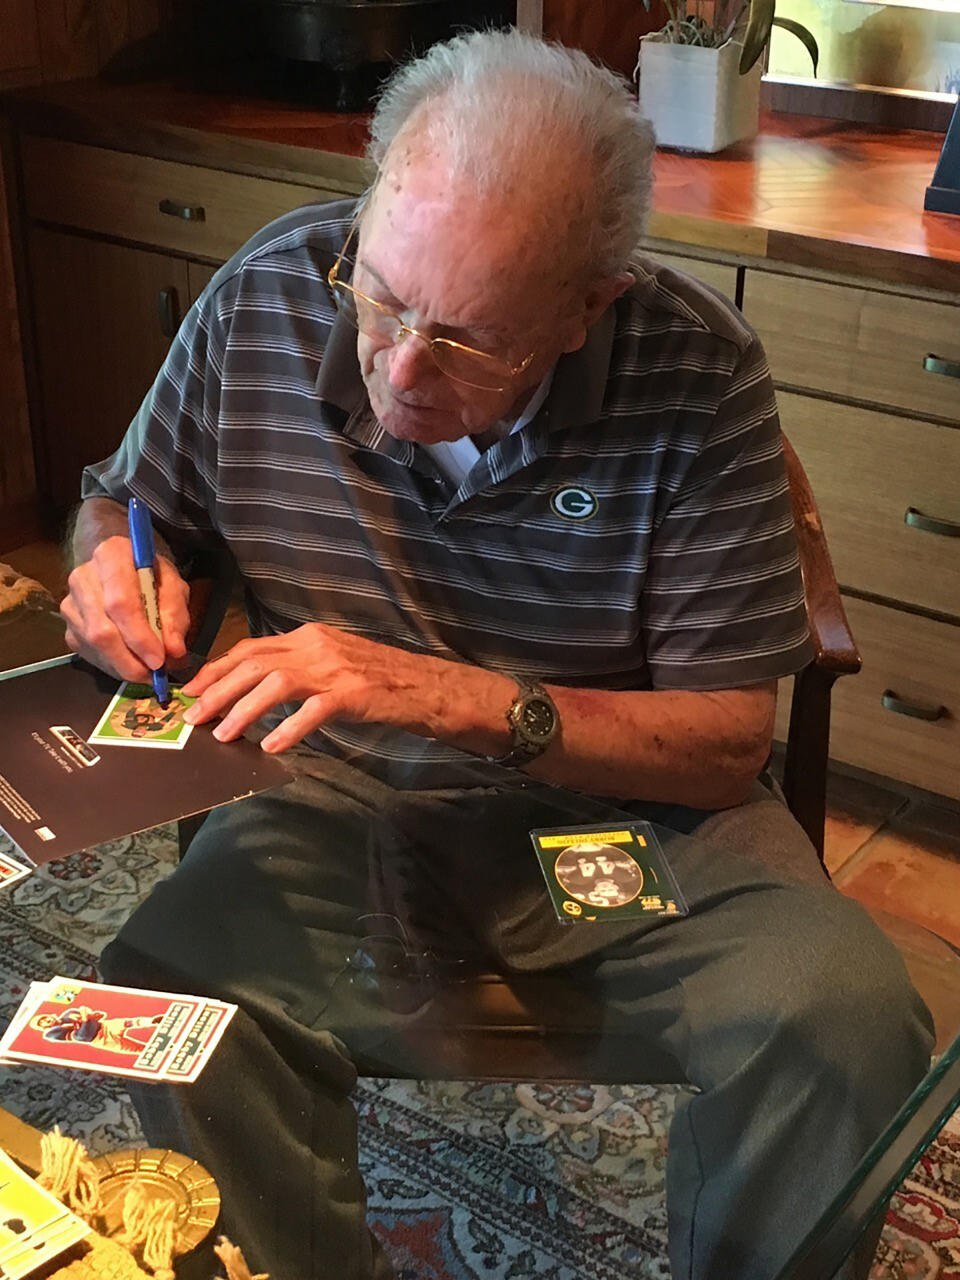 In this June 2019 photo provided by Karen Gooch, former Green Bay Packers football player Bobby Dillon autographs football cards at his home in Temple, Texas. Dillon was one of the best defensive players in the league. But the Packers were an NFL weakling at the time, going 33-61-2 while Dillon was playing safety so well he made four All-Pro teams and intercepted 52 passes. Dillon passed away at age 89 in August 2019, five months before he was selected for the Hall of Fame as part of the centennial class. (Karen Gooch via AP)